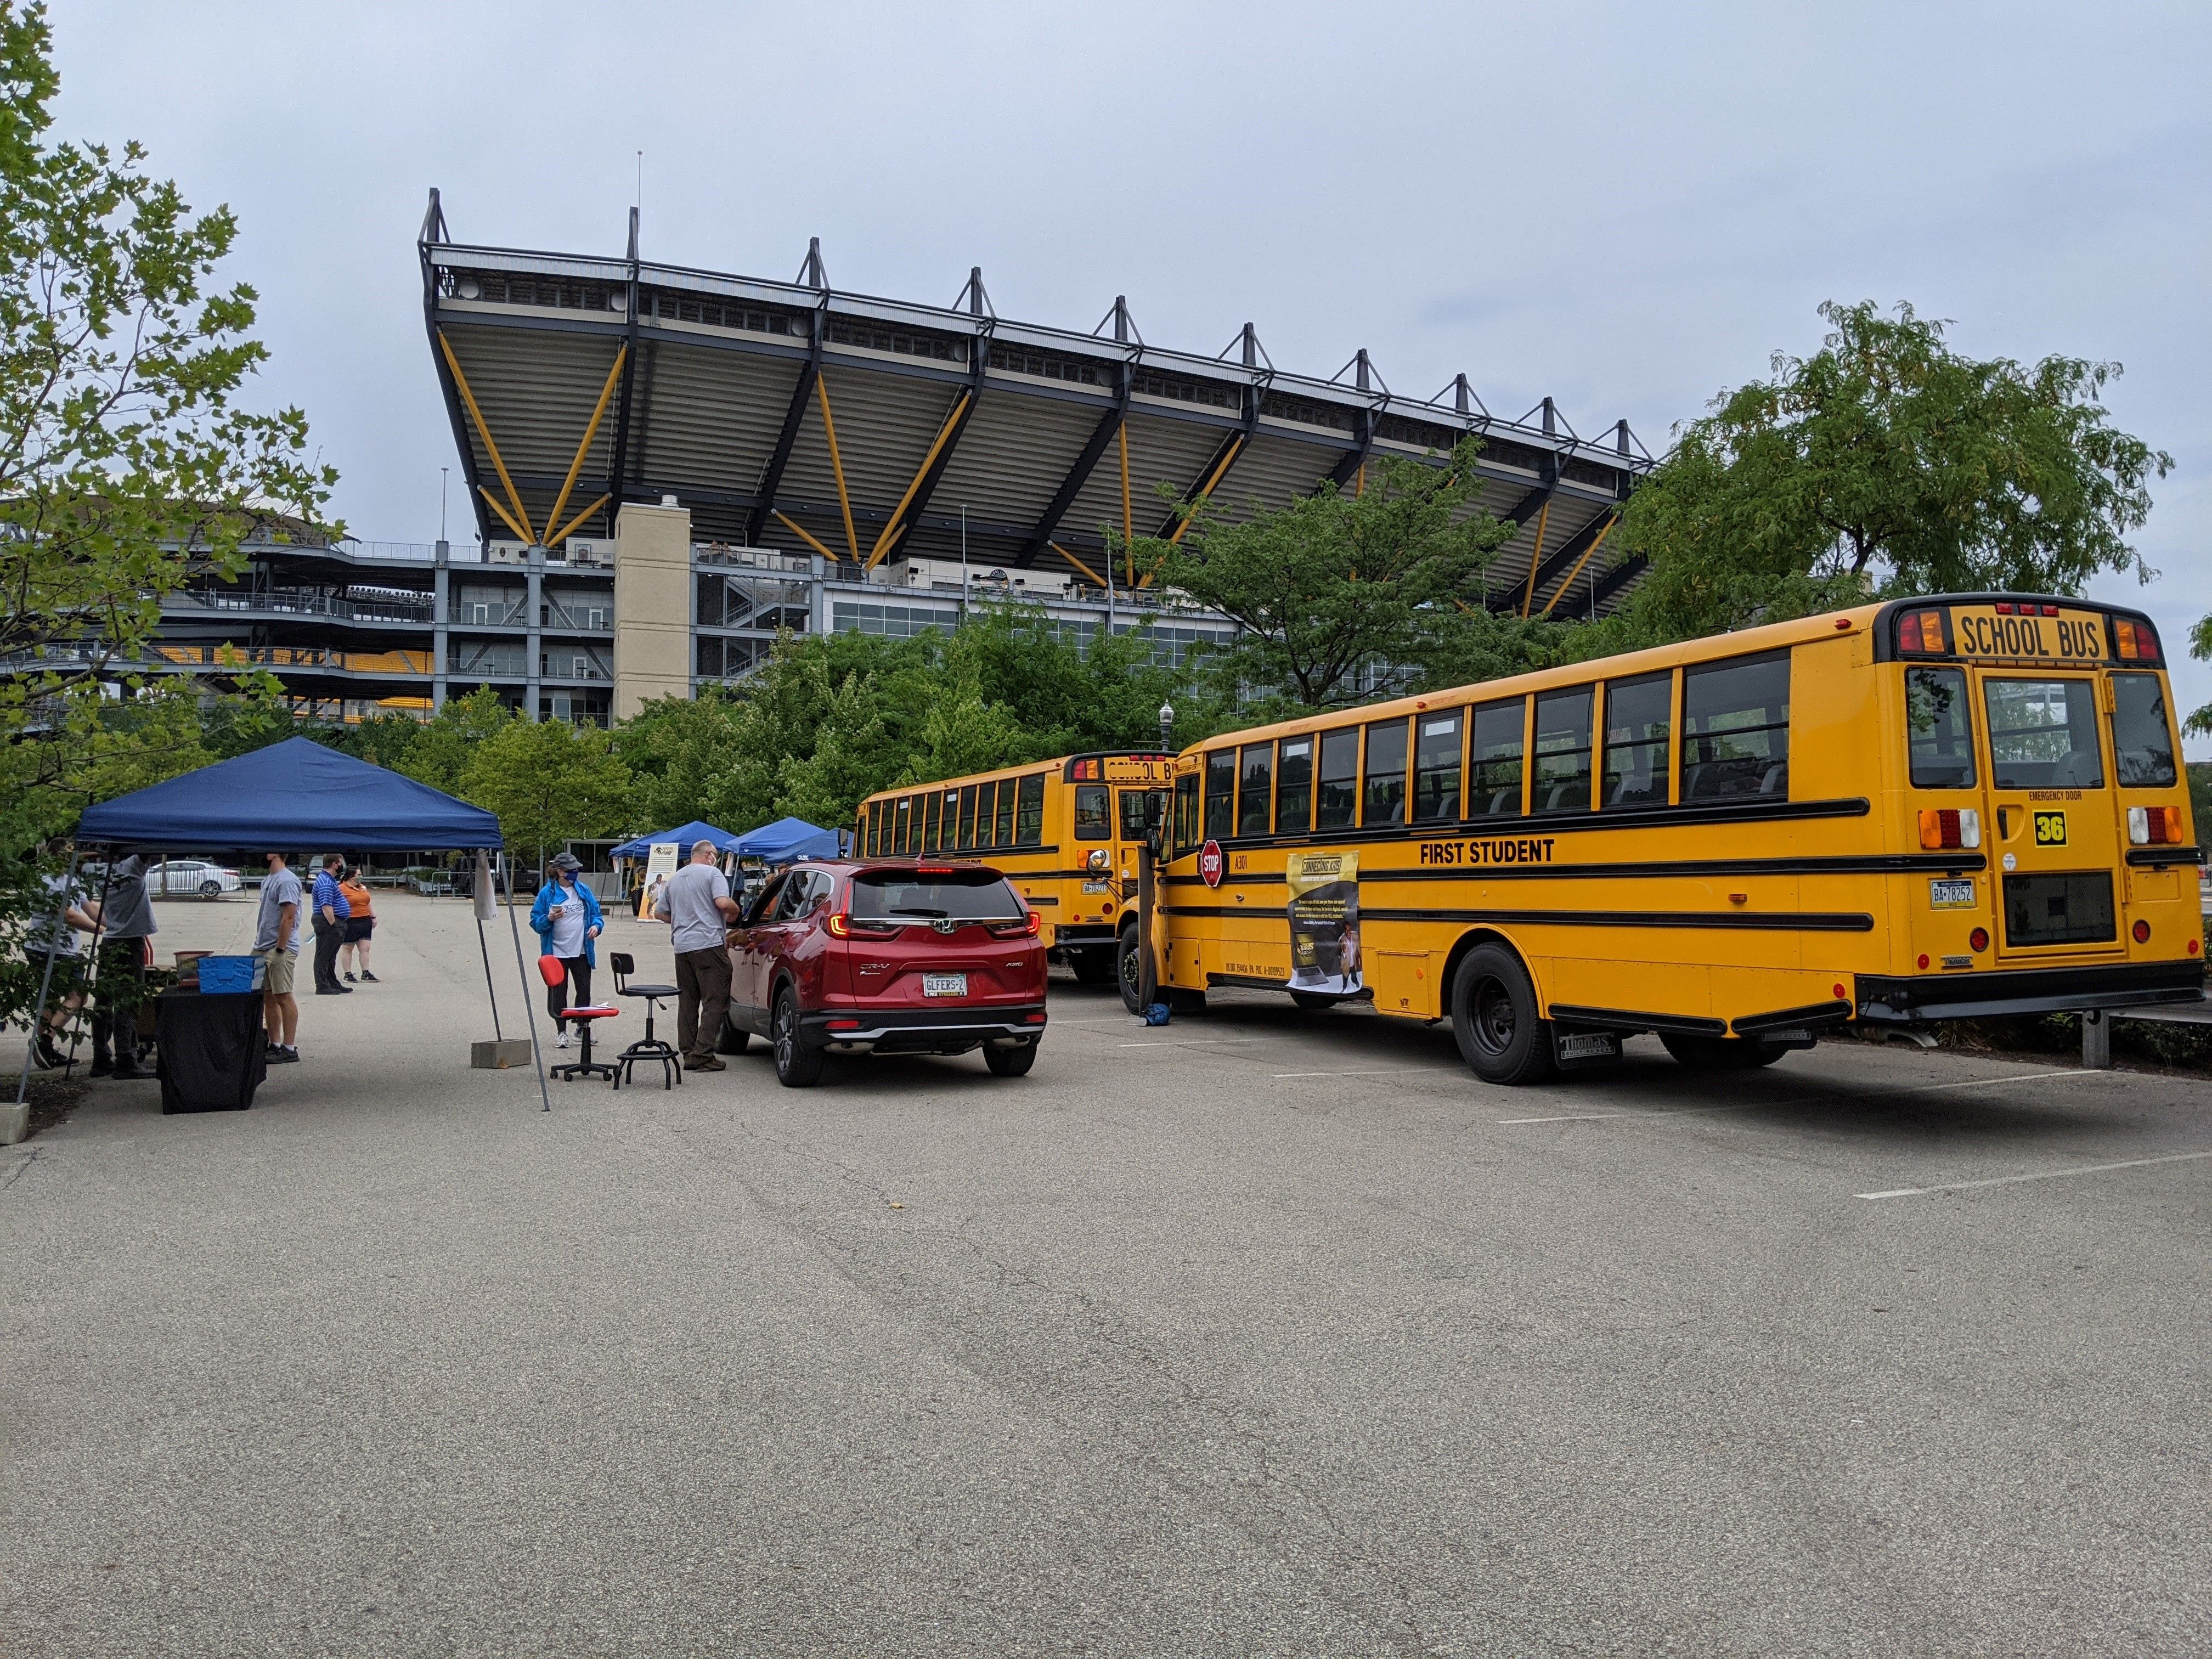 The event was held at Stage AE. Volunteers collected monetary donations and repurposed computers and tablets, which will be donated to local students for the upcoming school year.